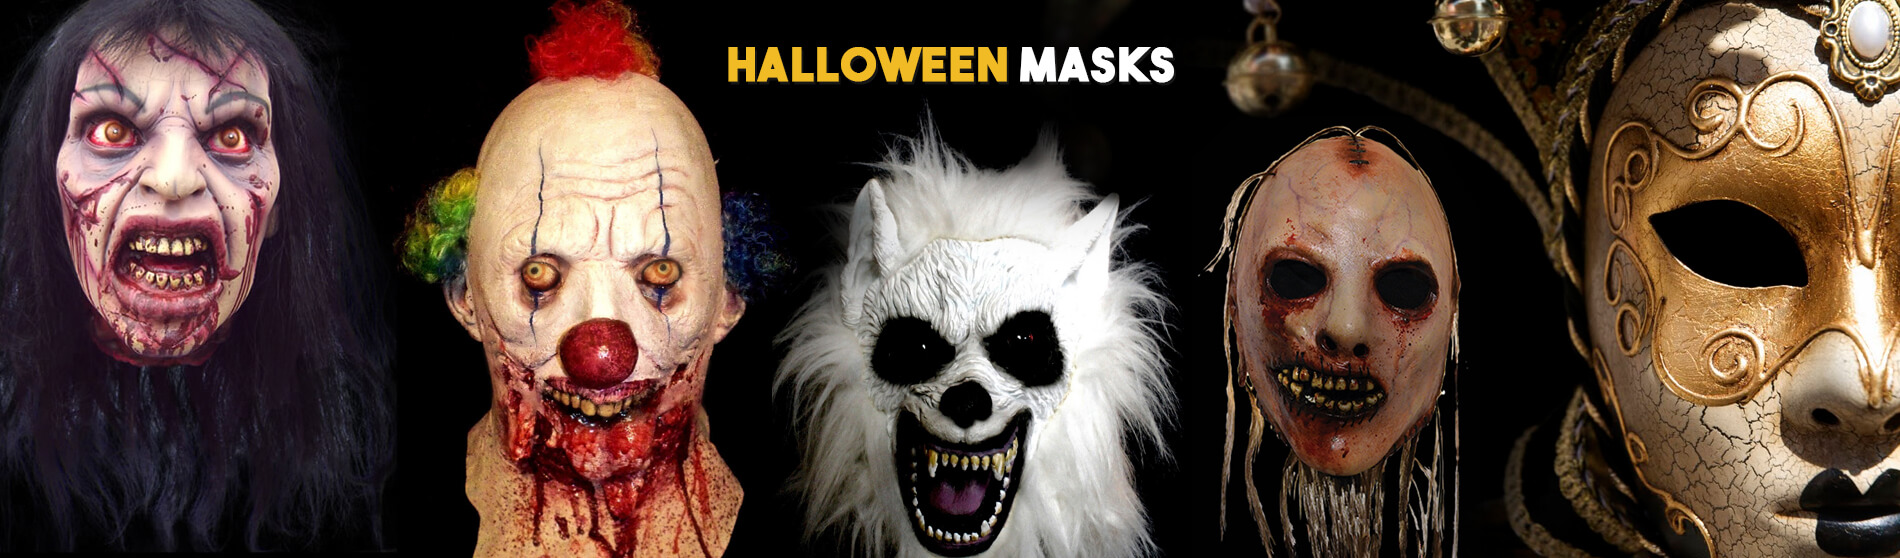 Scary vs. Funny: Finding the Right Halloween Mask for Your Adult Party – Glendale Halloween